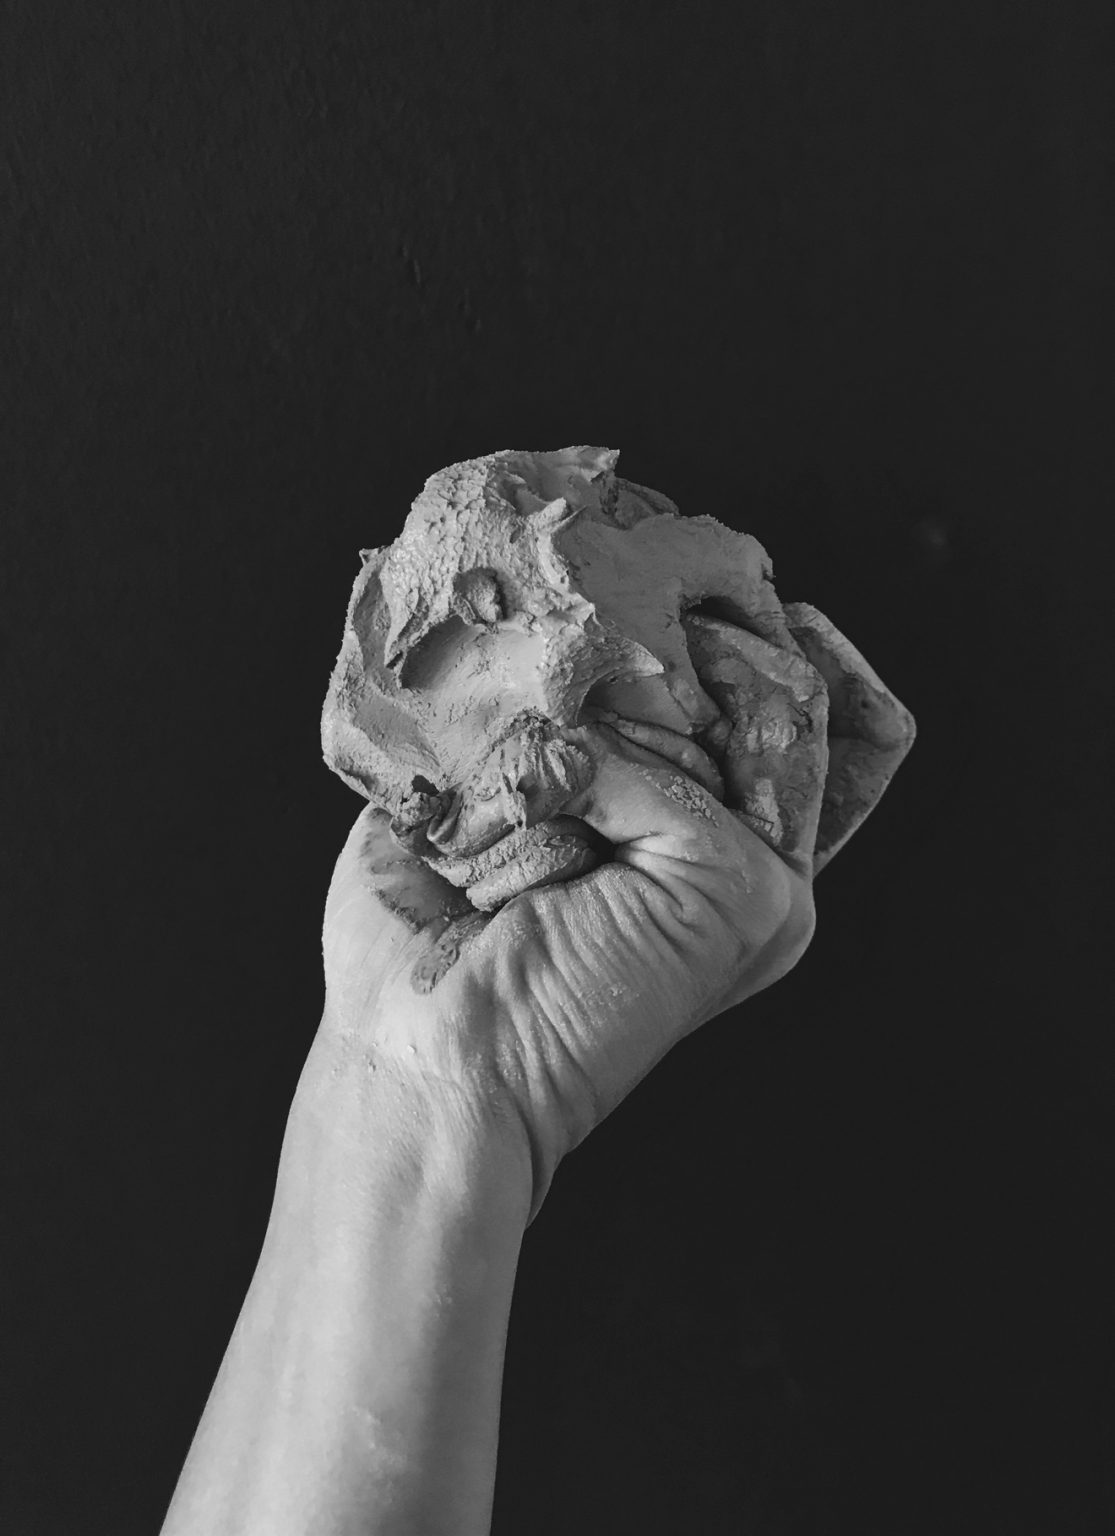 A hand holding a large wad of clay.